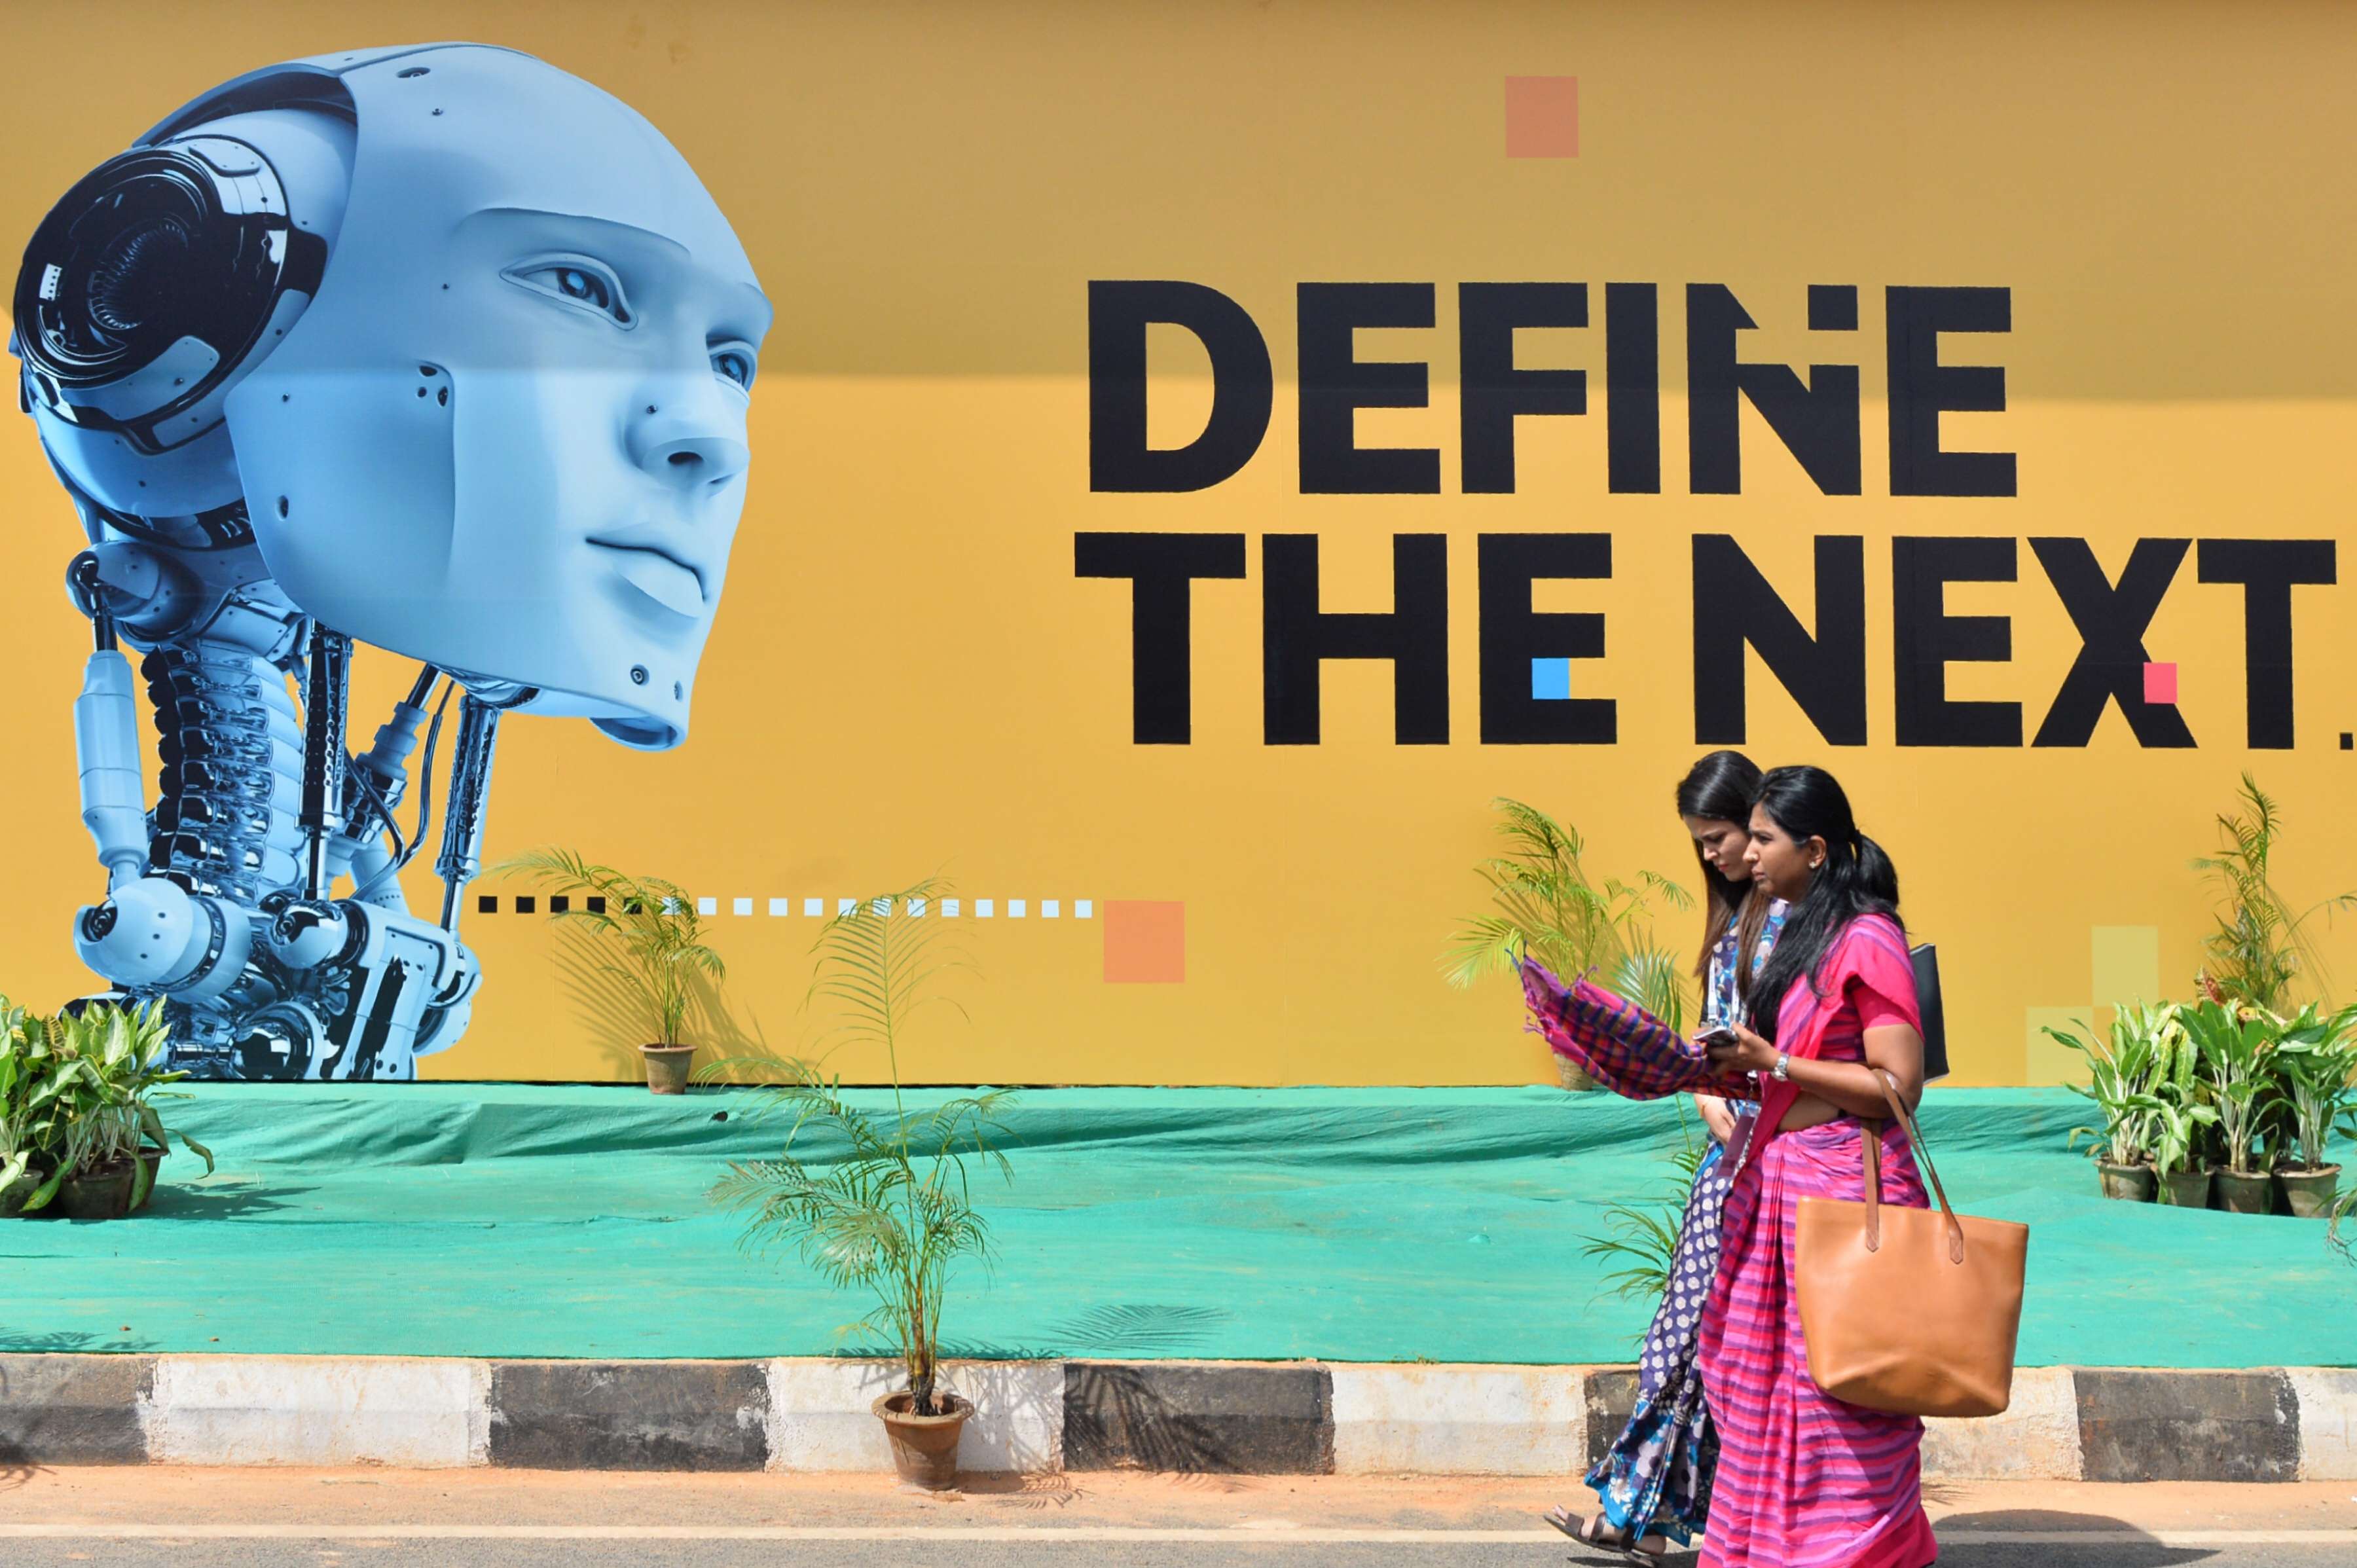 The Indian information technology sector must adapt to a new era of apps, automation and a hostile visa policy courtesy of the new American president